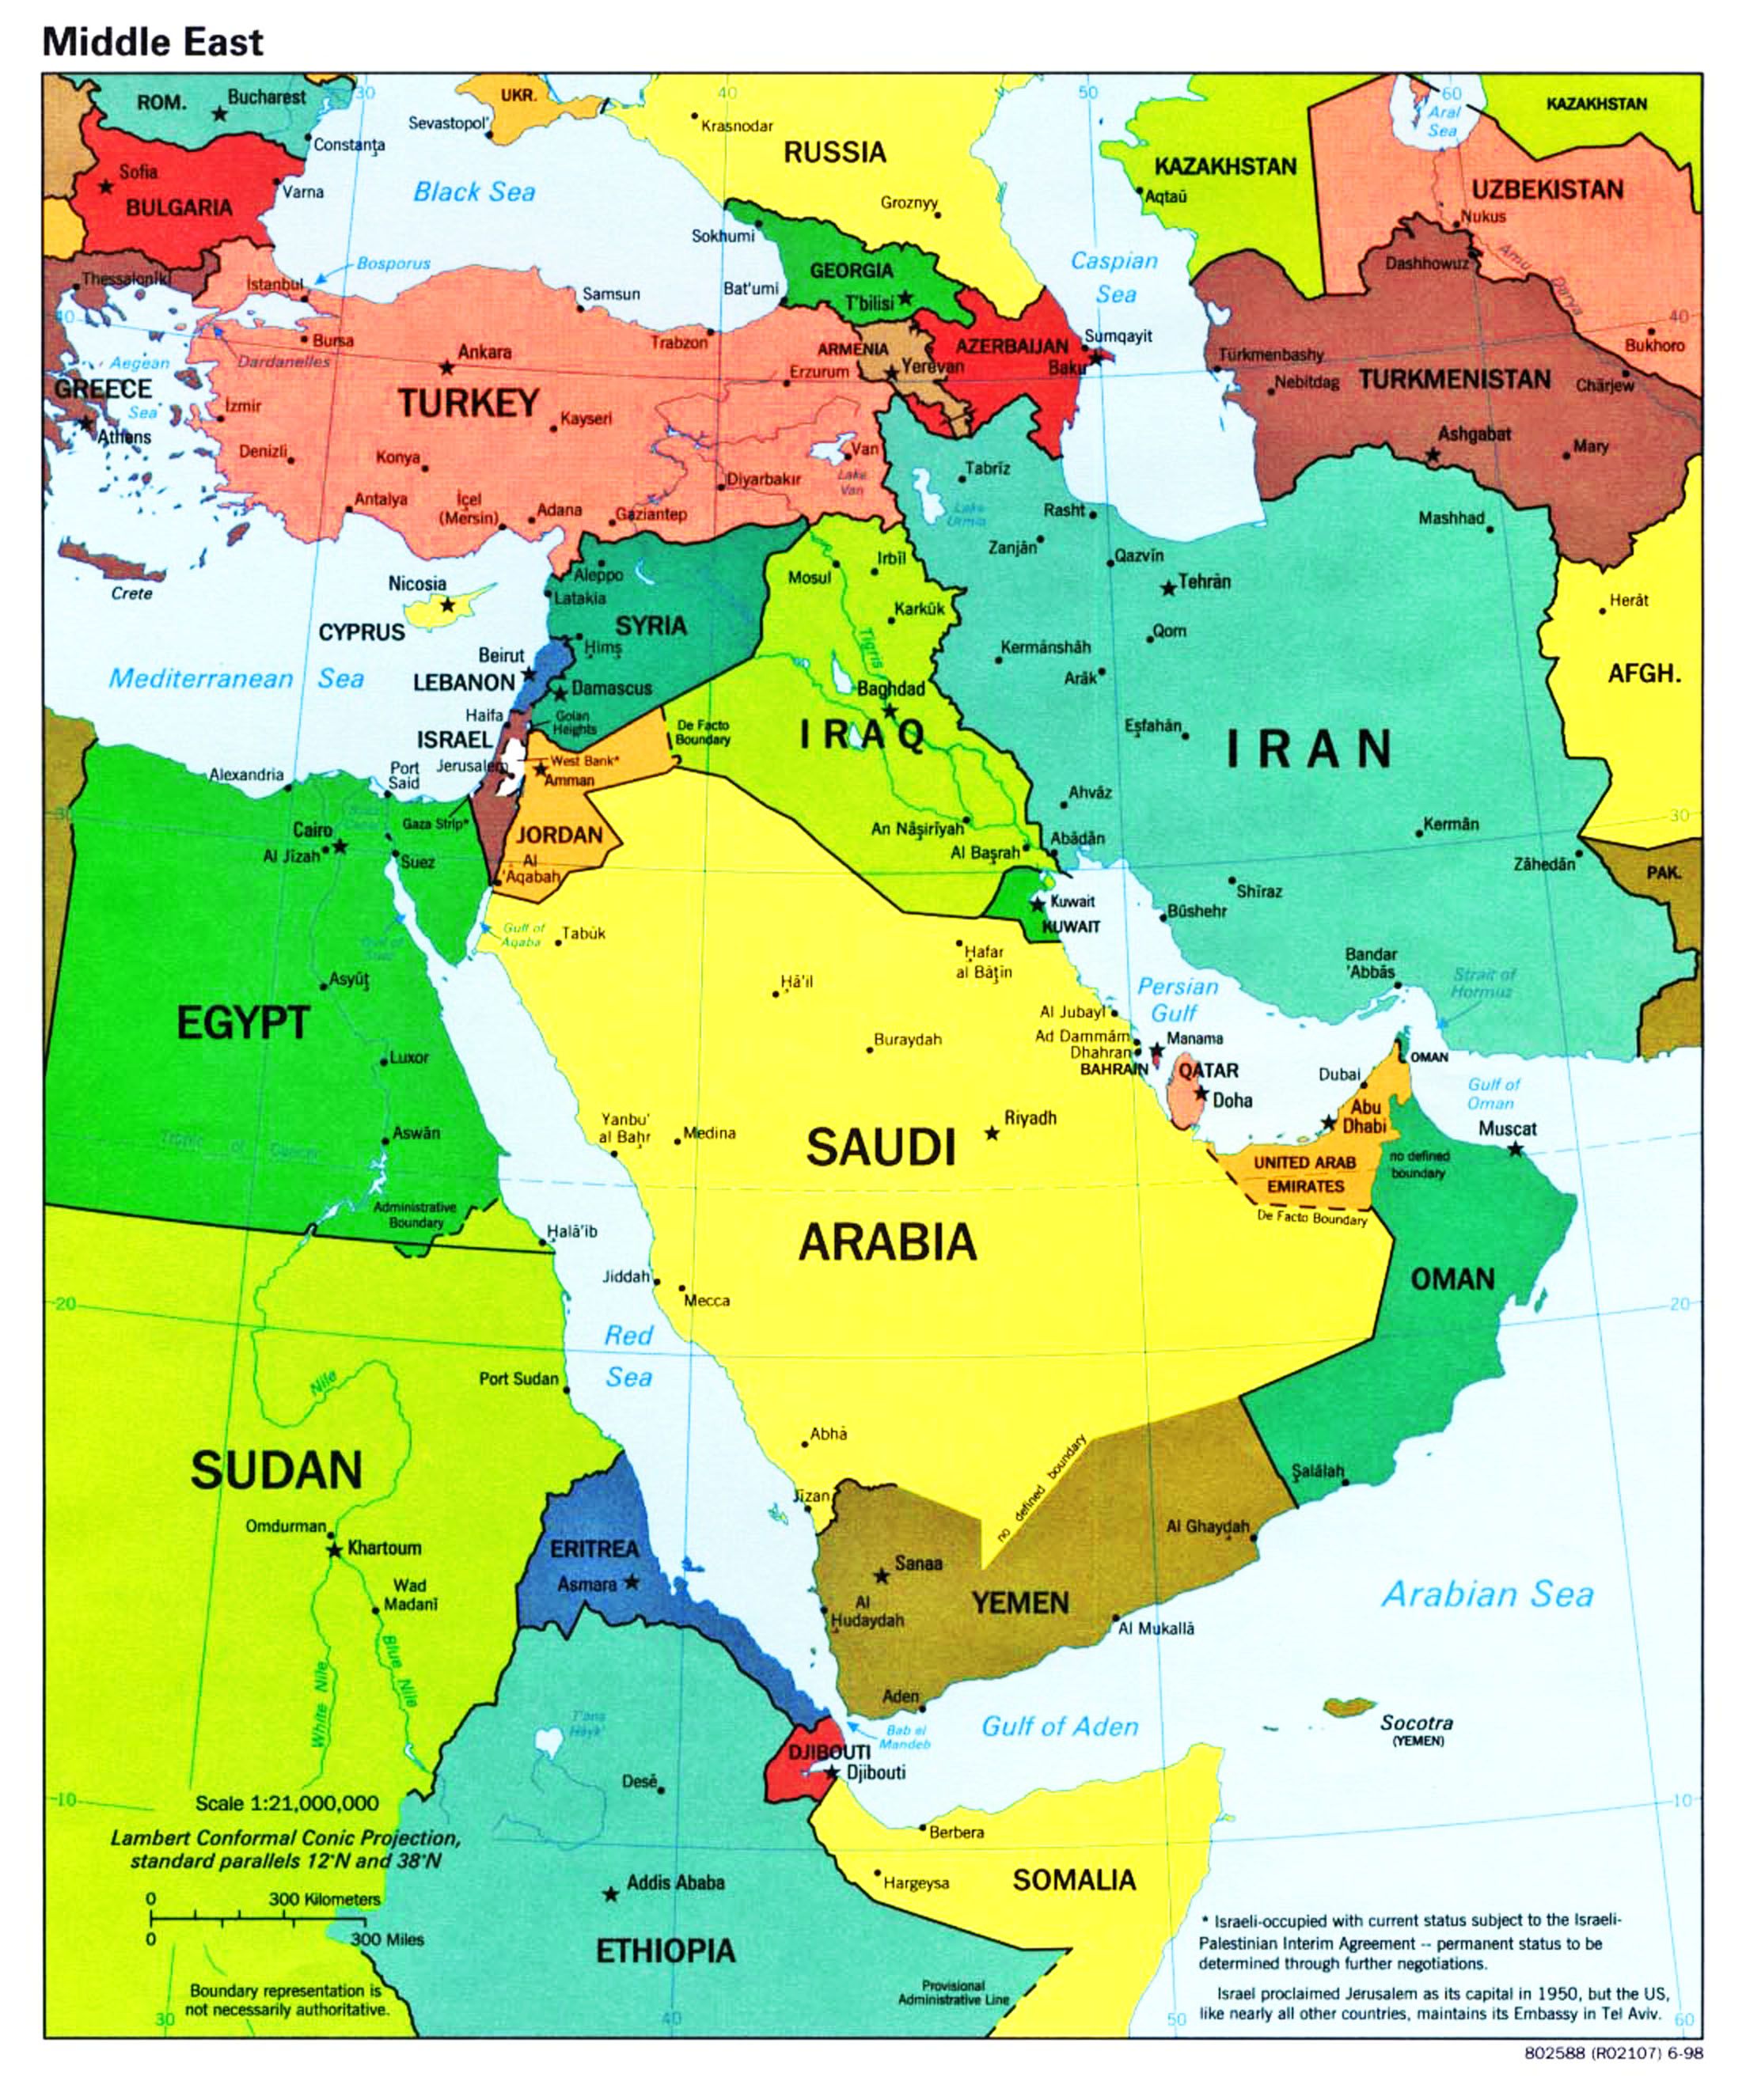 551788 Middle East Map Free Large Image 